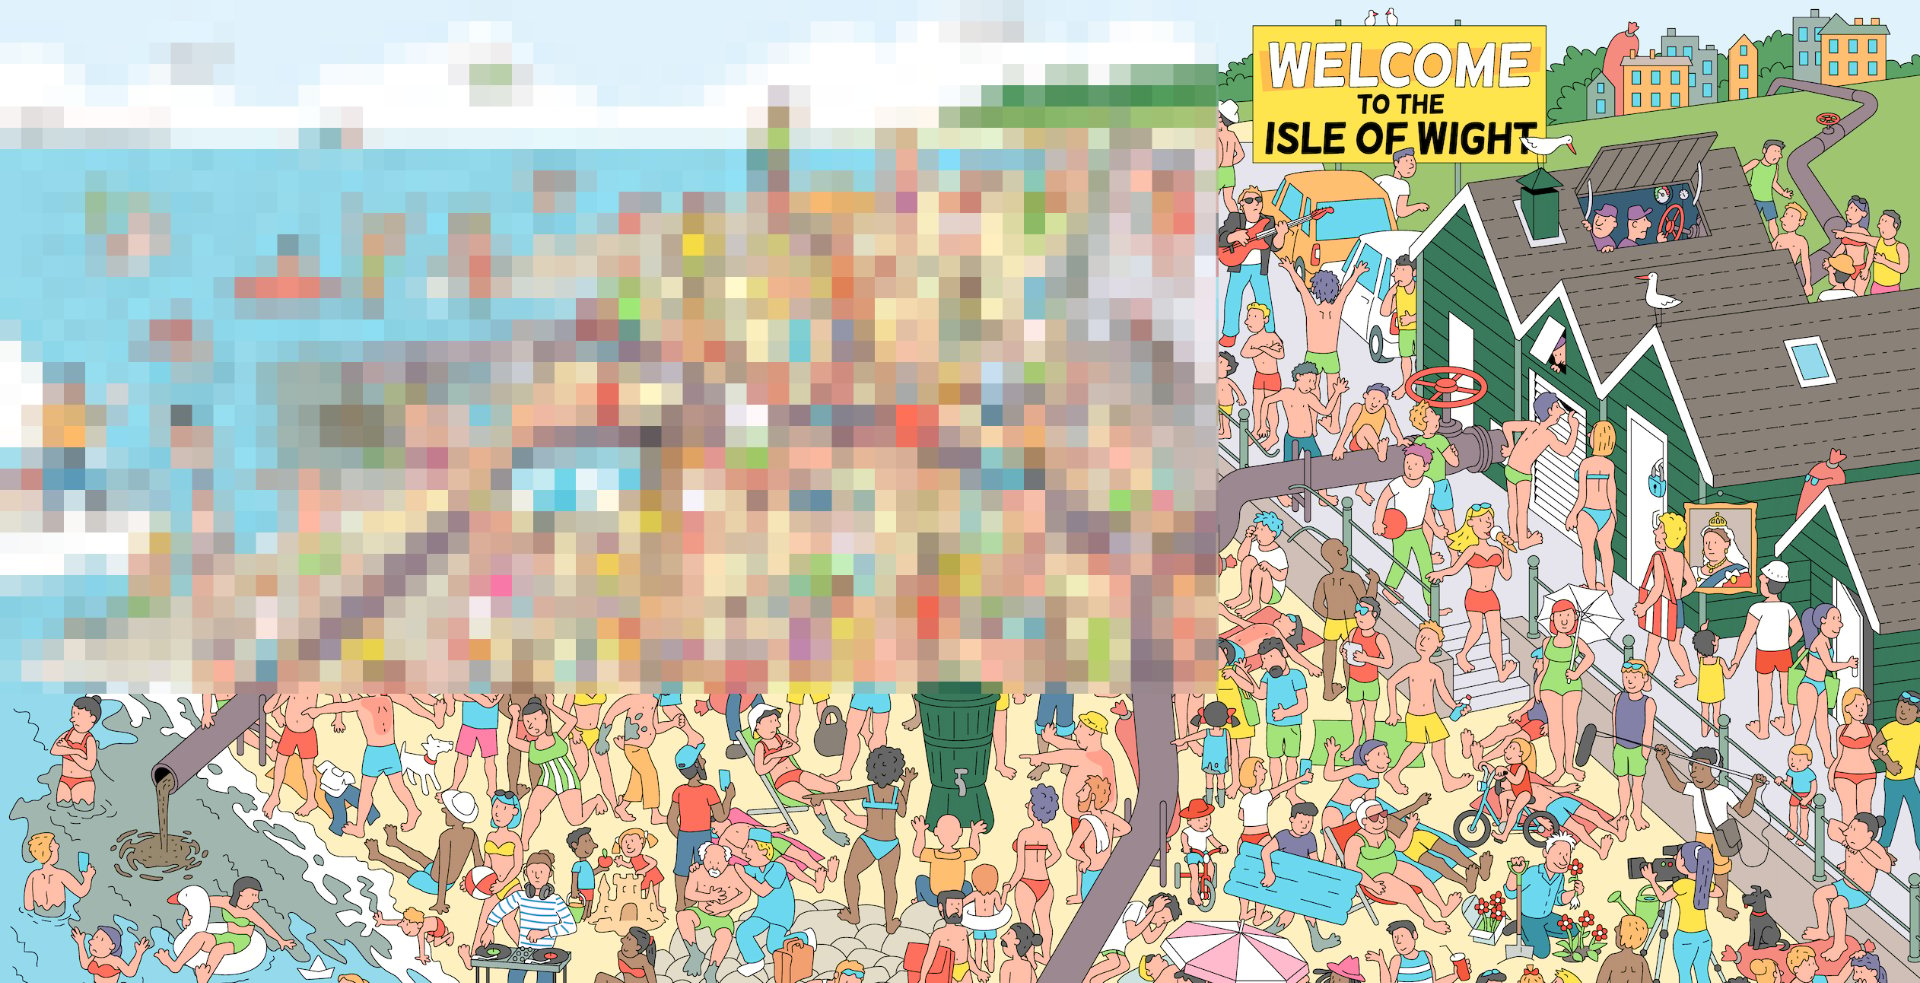 Illustration of a beach scene crowded with people